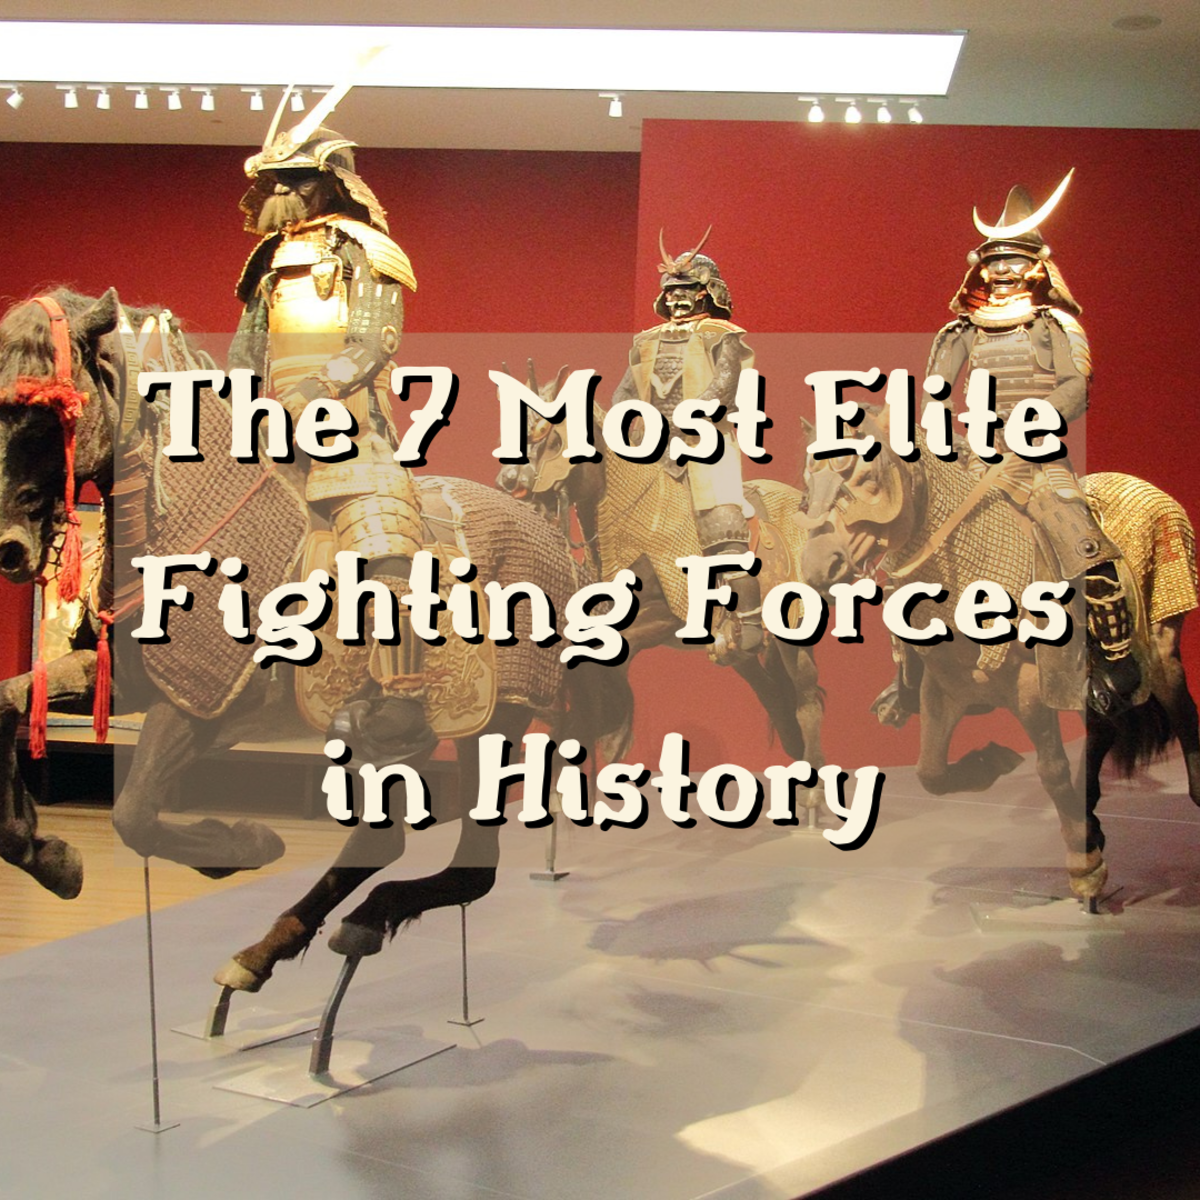 The 7 Most Elite Fighting Forces in History